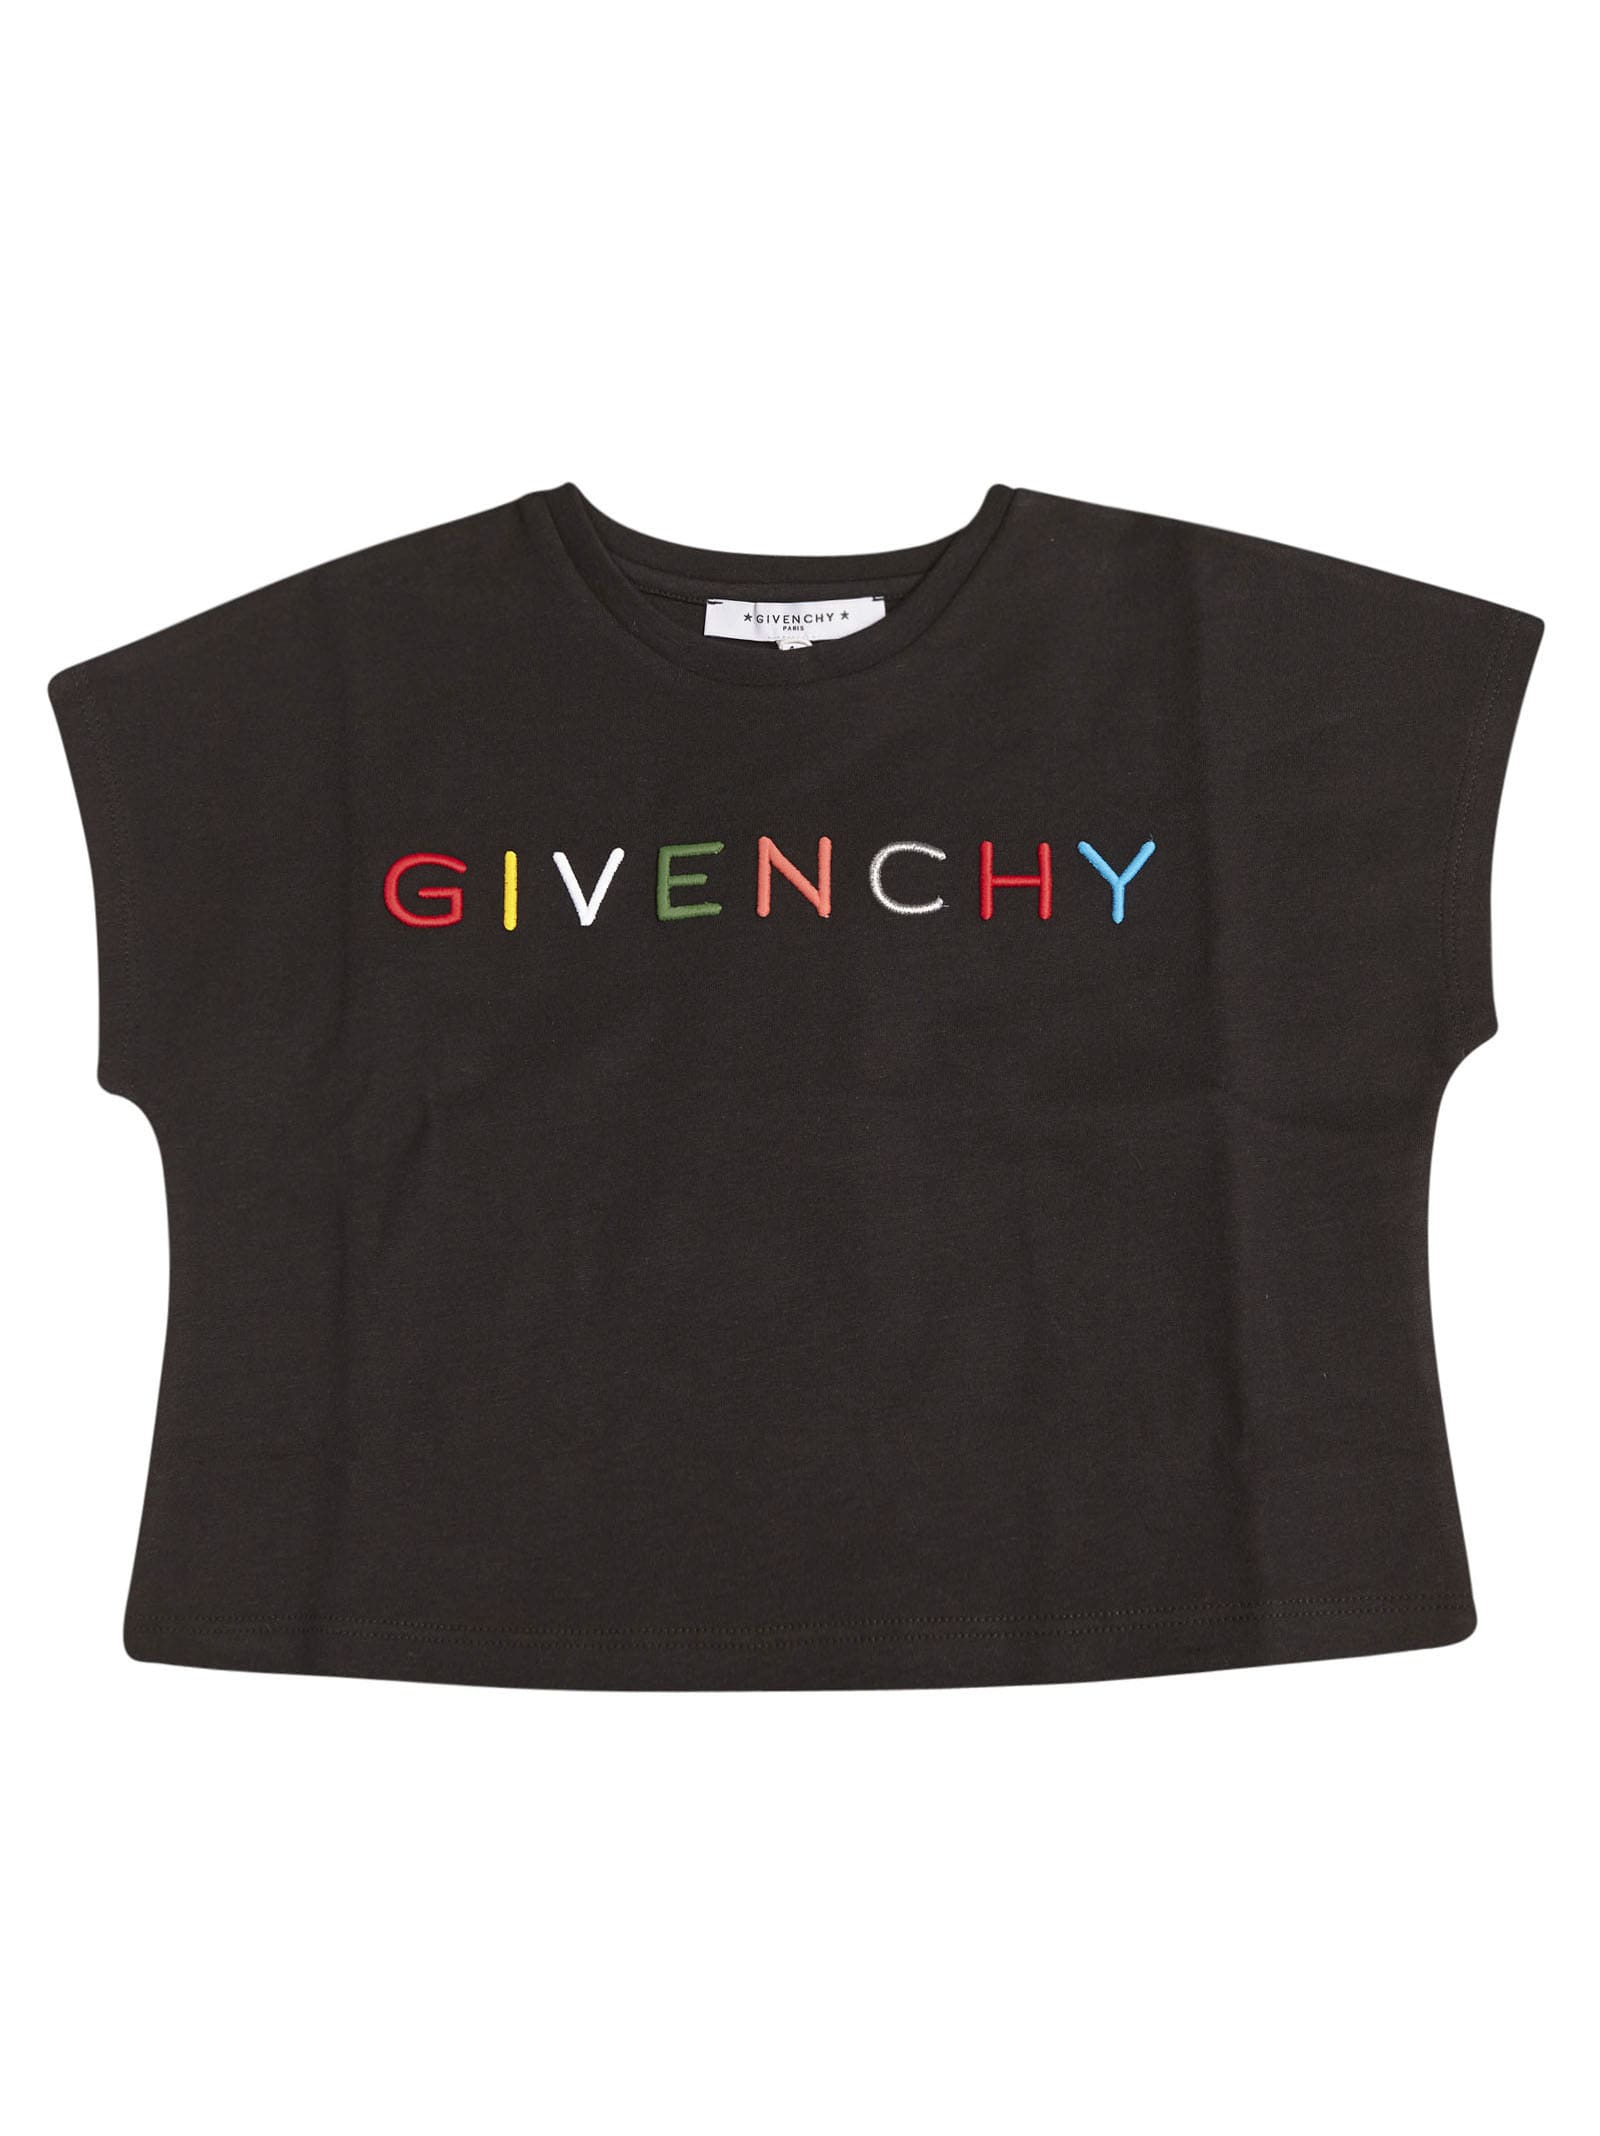 GIVENCHY BLACK T-SHIRT WITH COLORFUL LOGO FOR GIRL,11222469